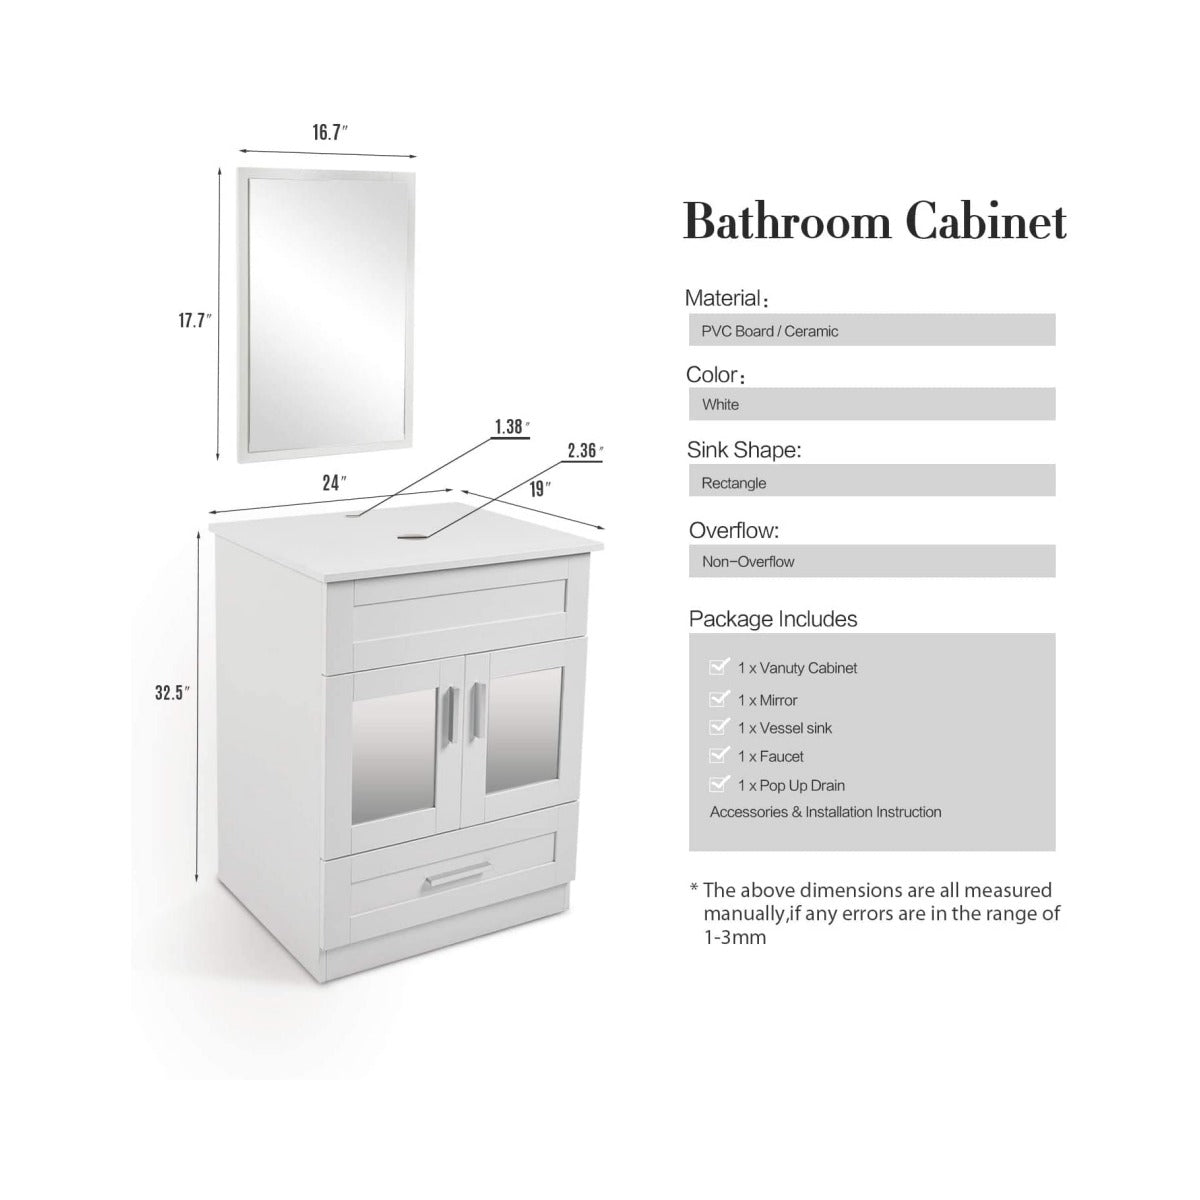 Elecwish White Bathroom Vanity Cabinet size and specification